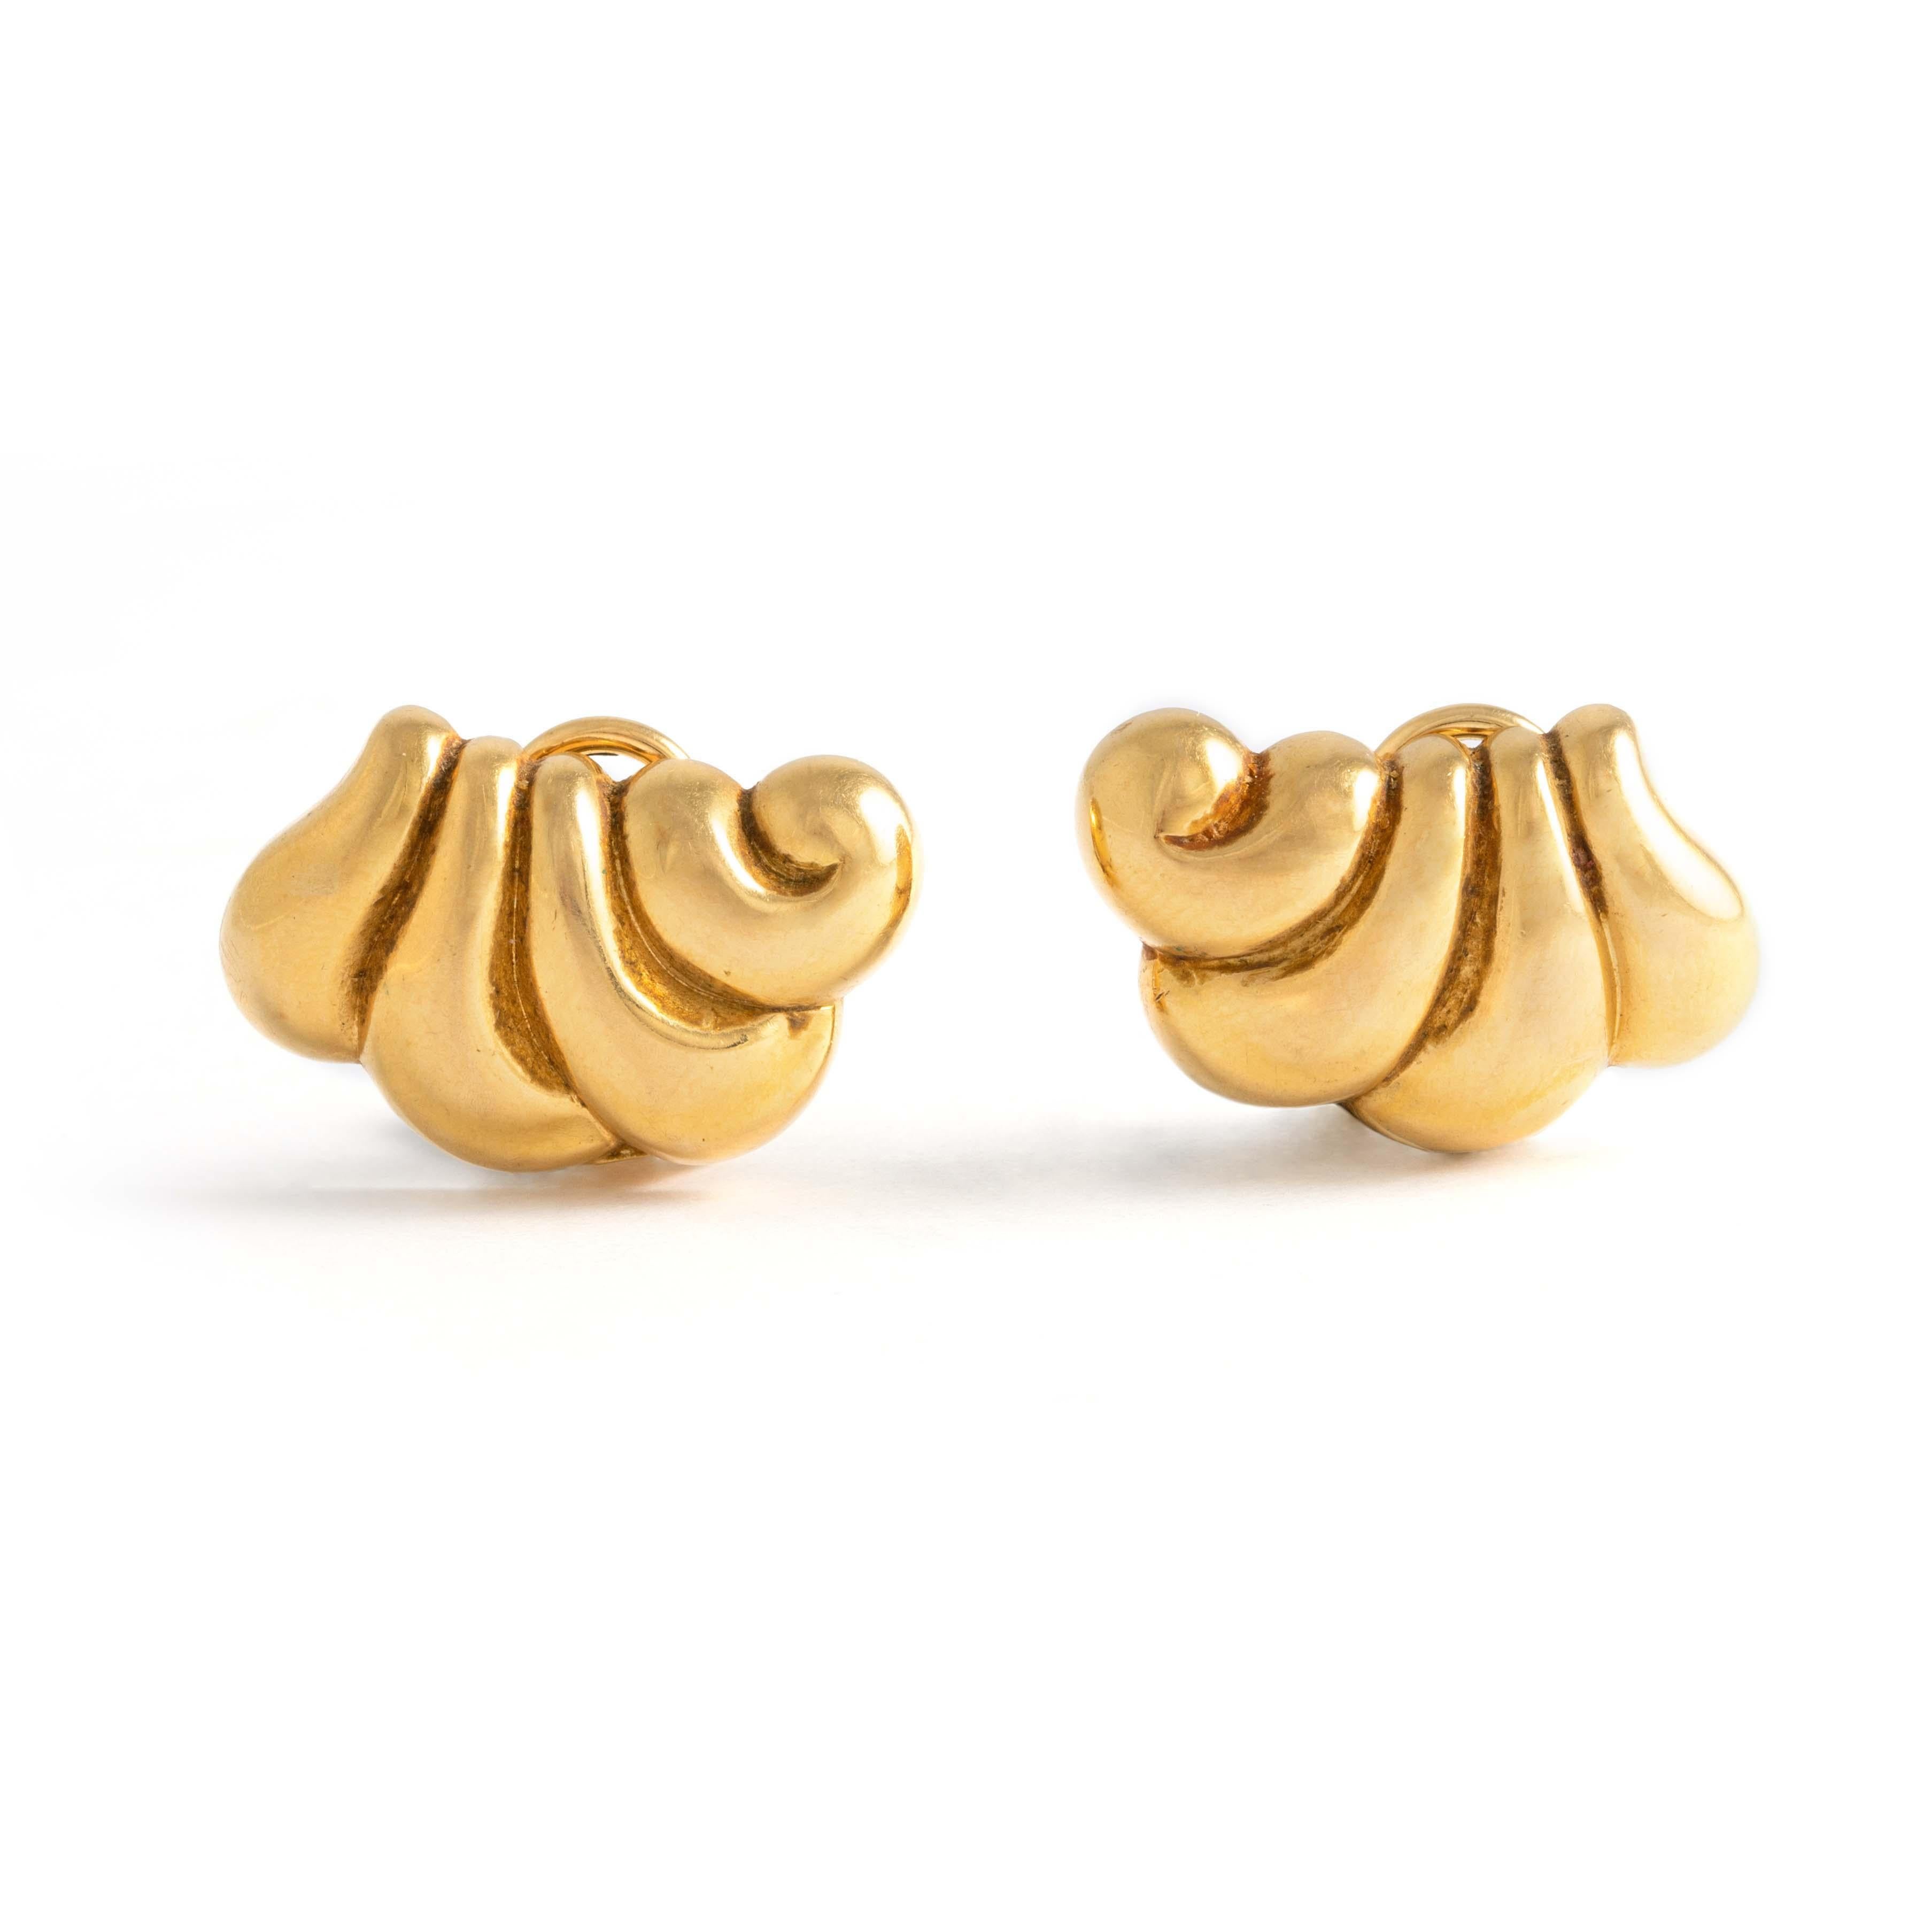 Pair of 18K yellow gold ear clips. Circa 1950
Dimensions: 1.60 centimeters x 2.60 centimeters. 
Total weight: 8.77 grams.